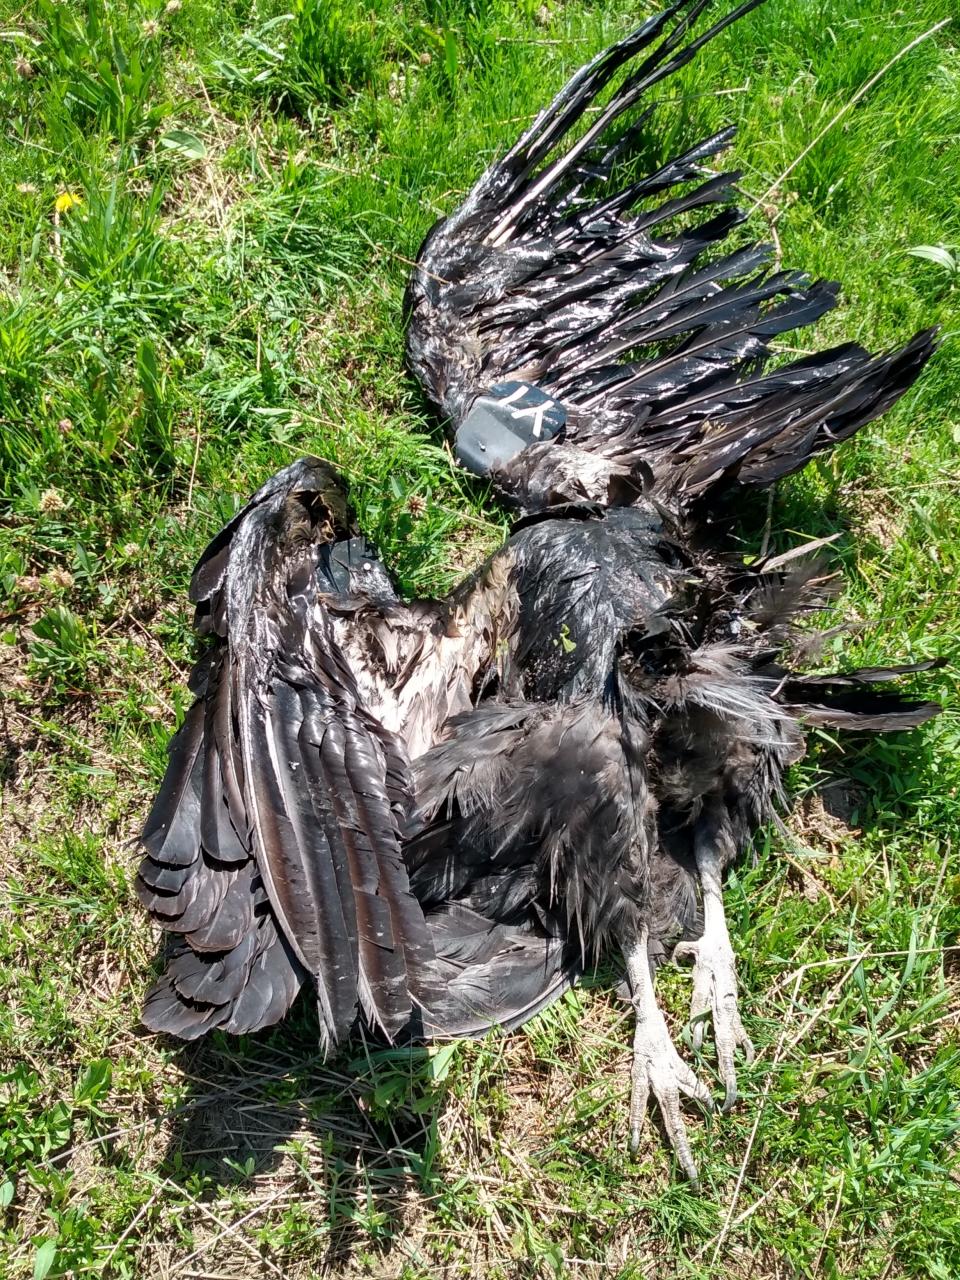 A California condor was found dead in southern Utah. Officials say it was shot with a firearm. (Credit: Utah Division of Wildlife Resources)